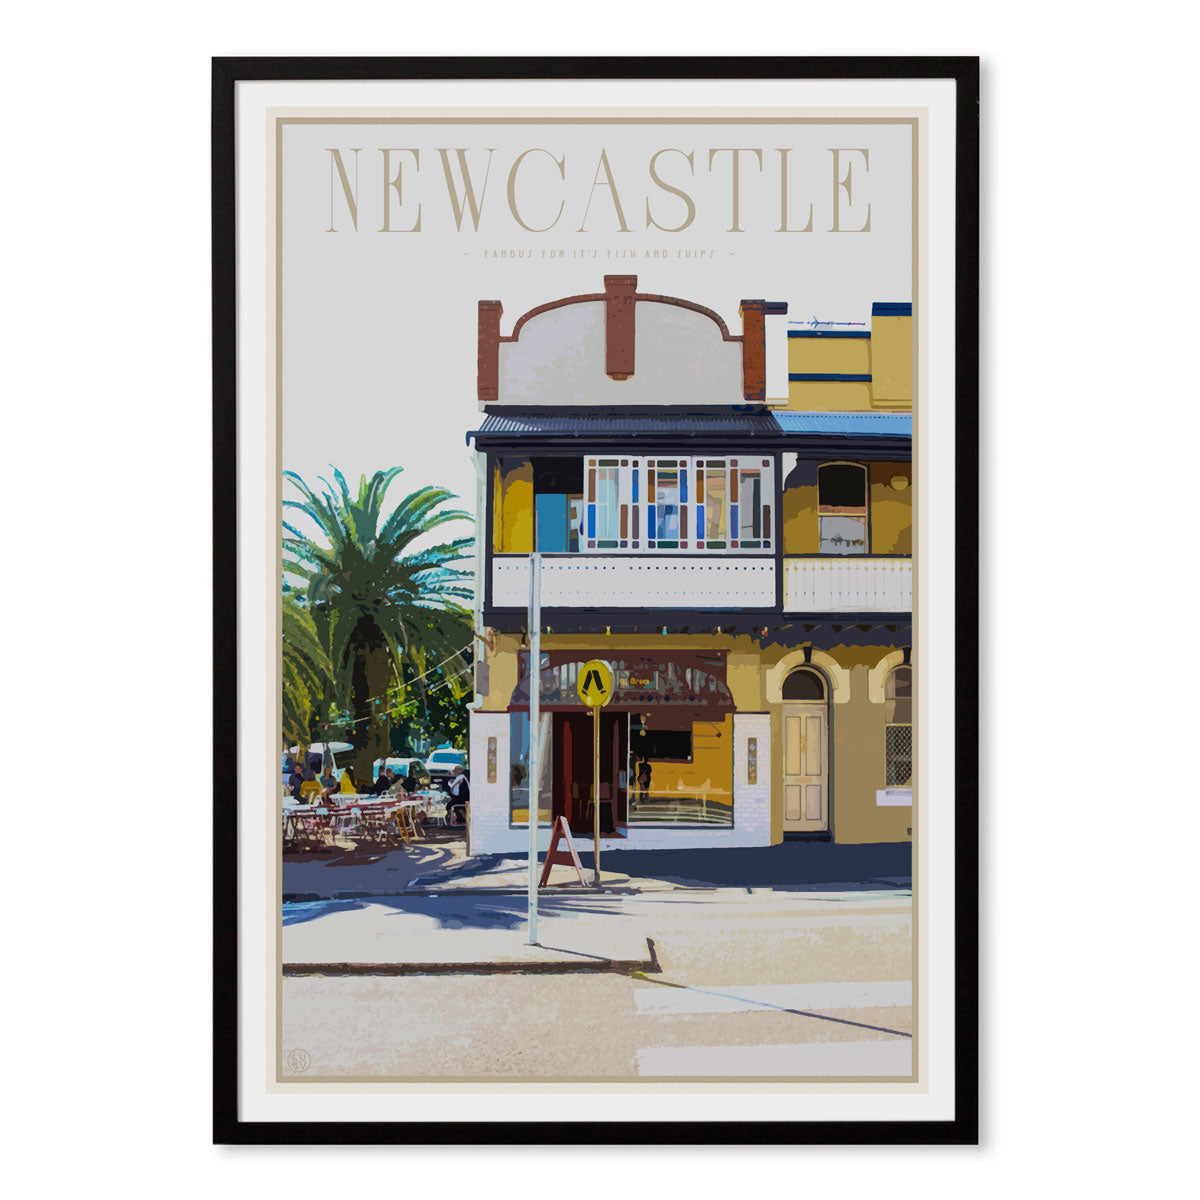 Newcastle fish and chips vintage travel style print by places we luv